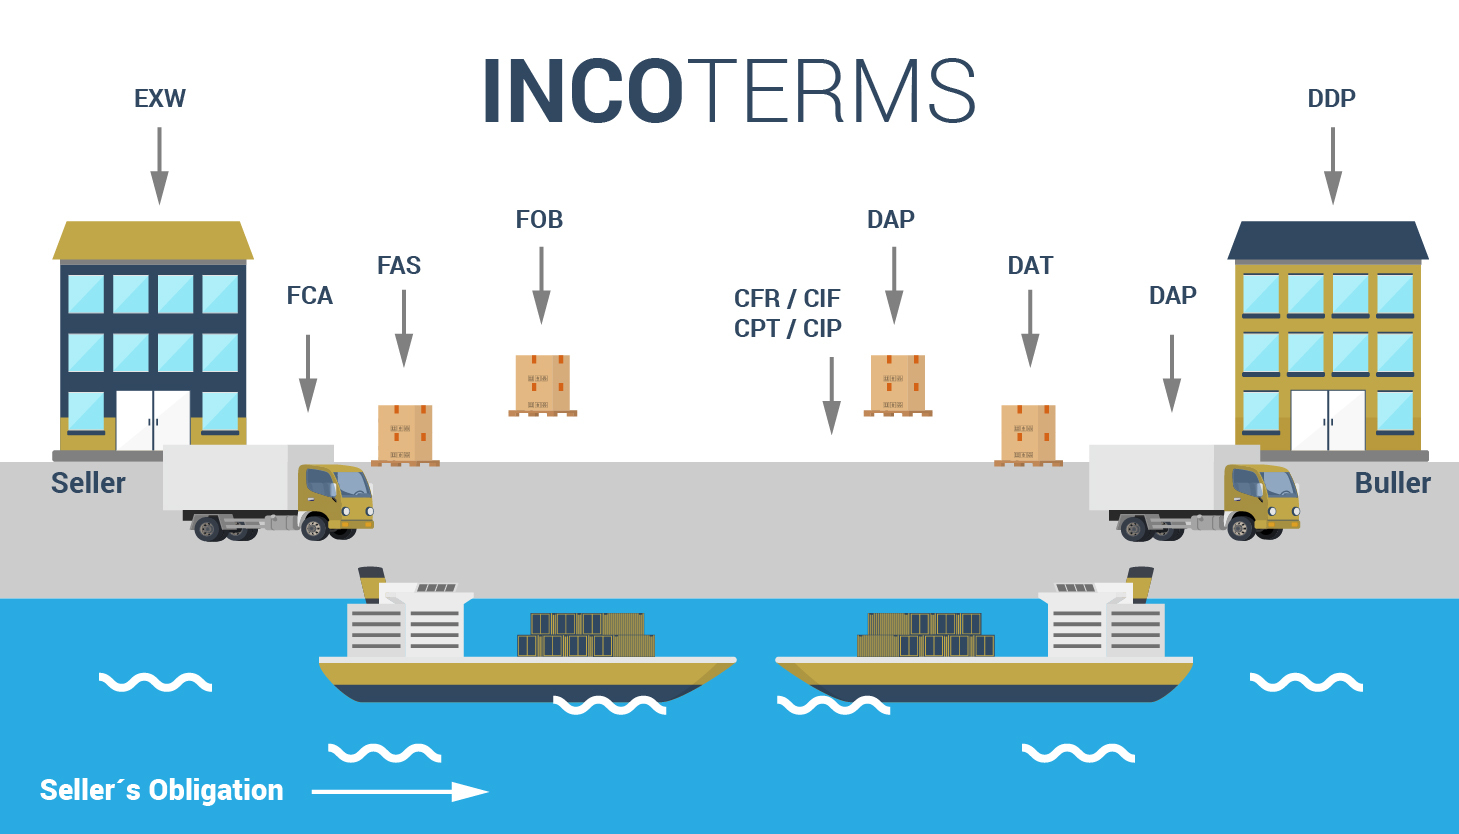 The Sellers Obligations in Incoterms